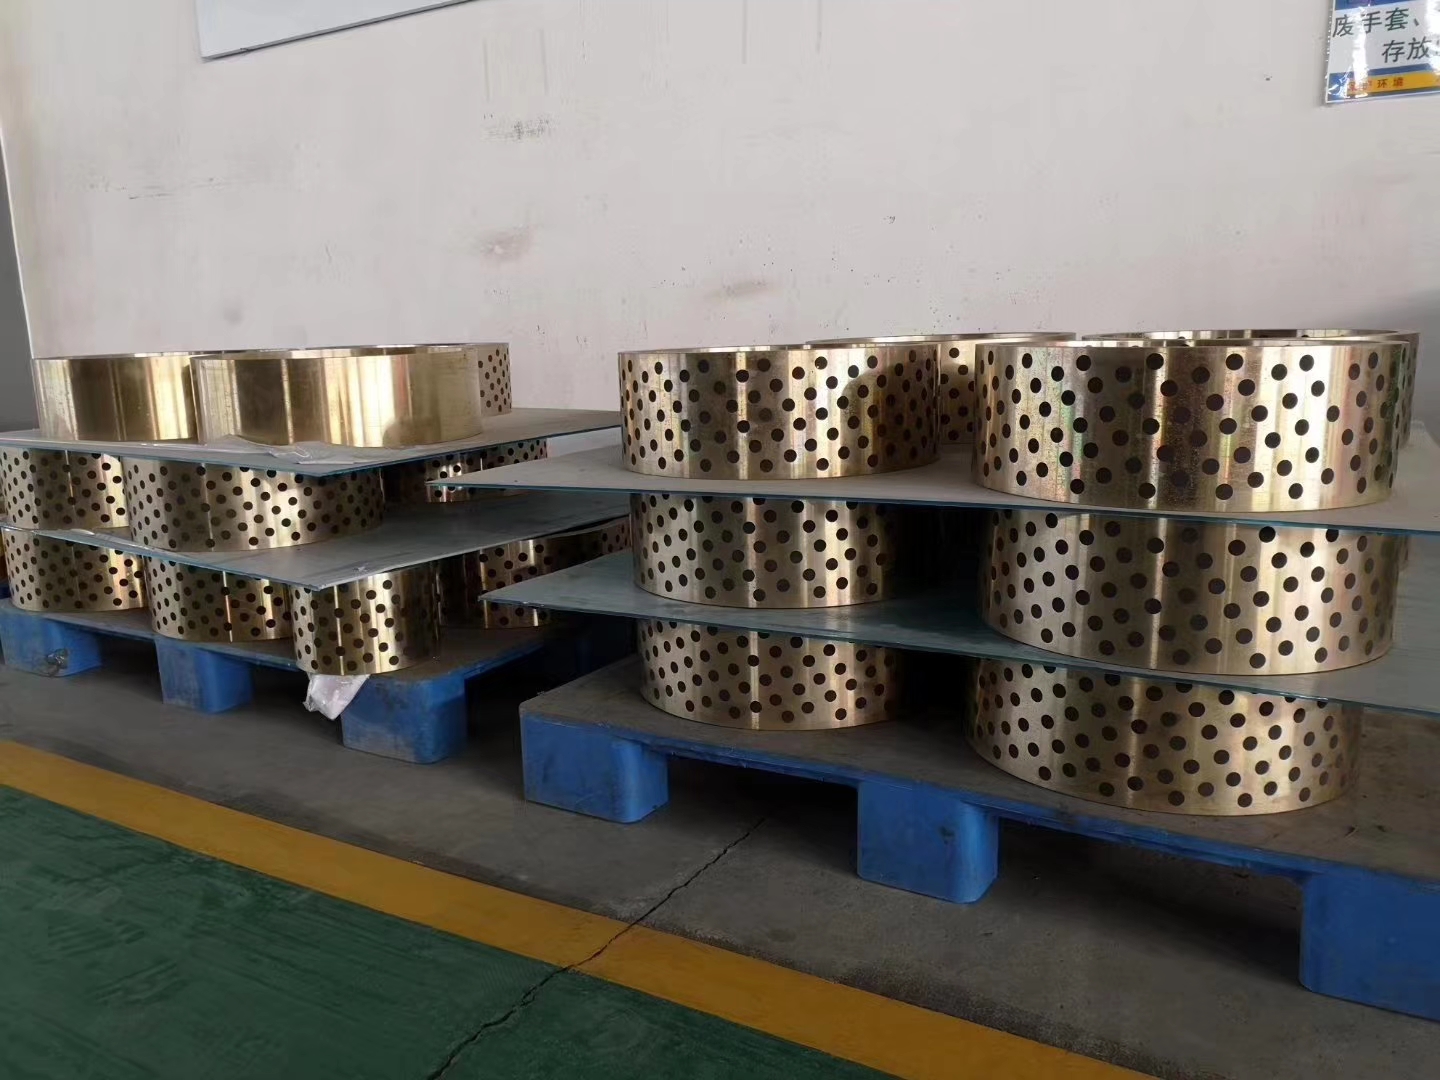 Copper Sleeve Manufacturers Supply Graphite Copper Sleeves for Automotive Mold Accessories